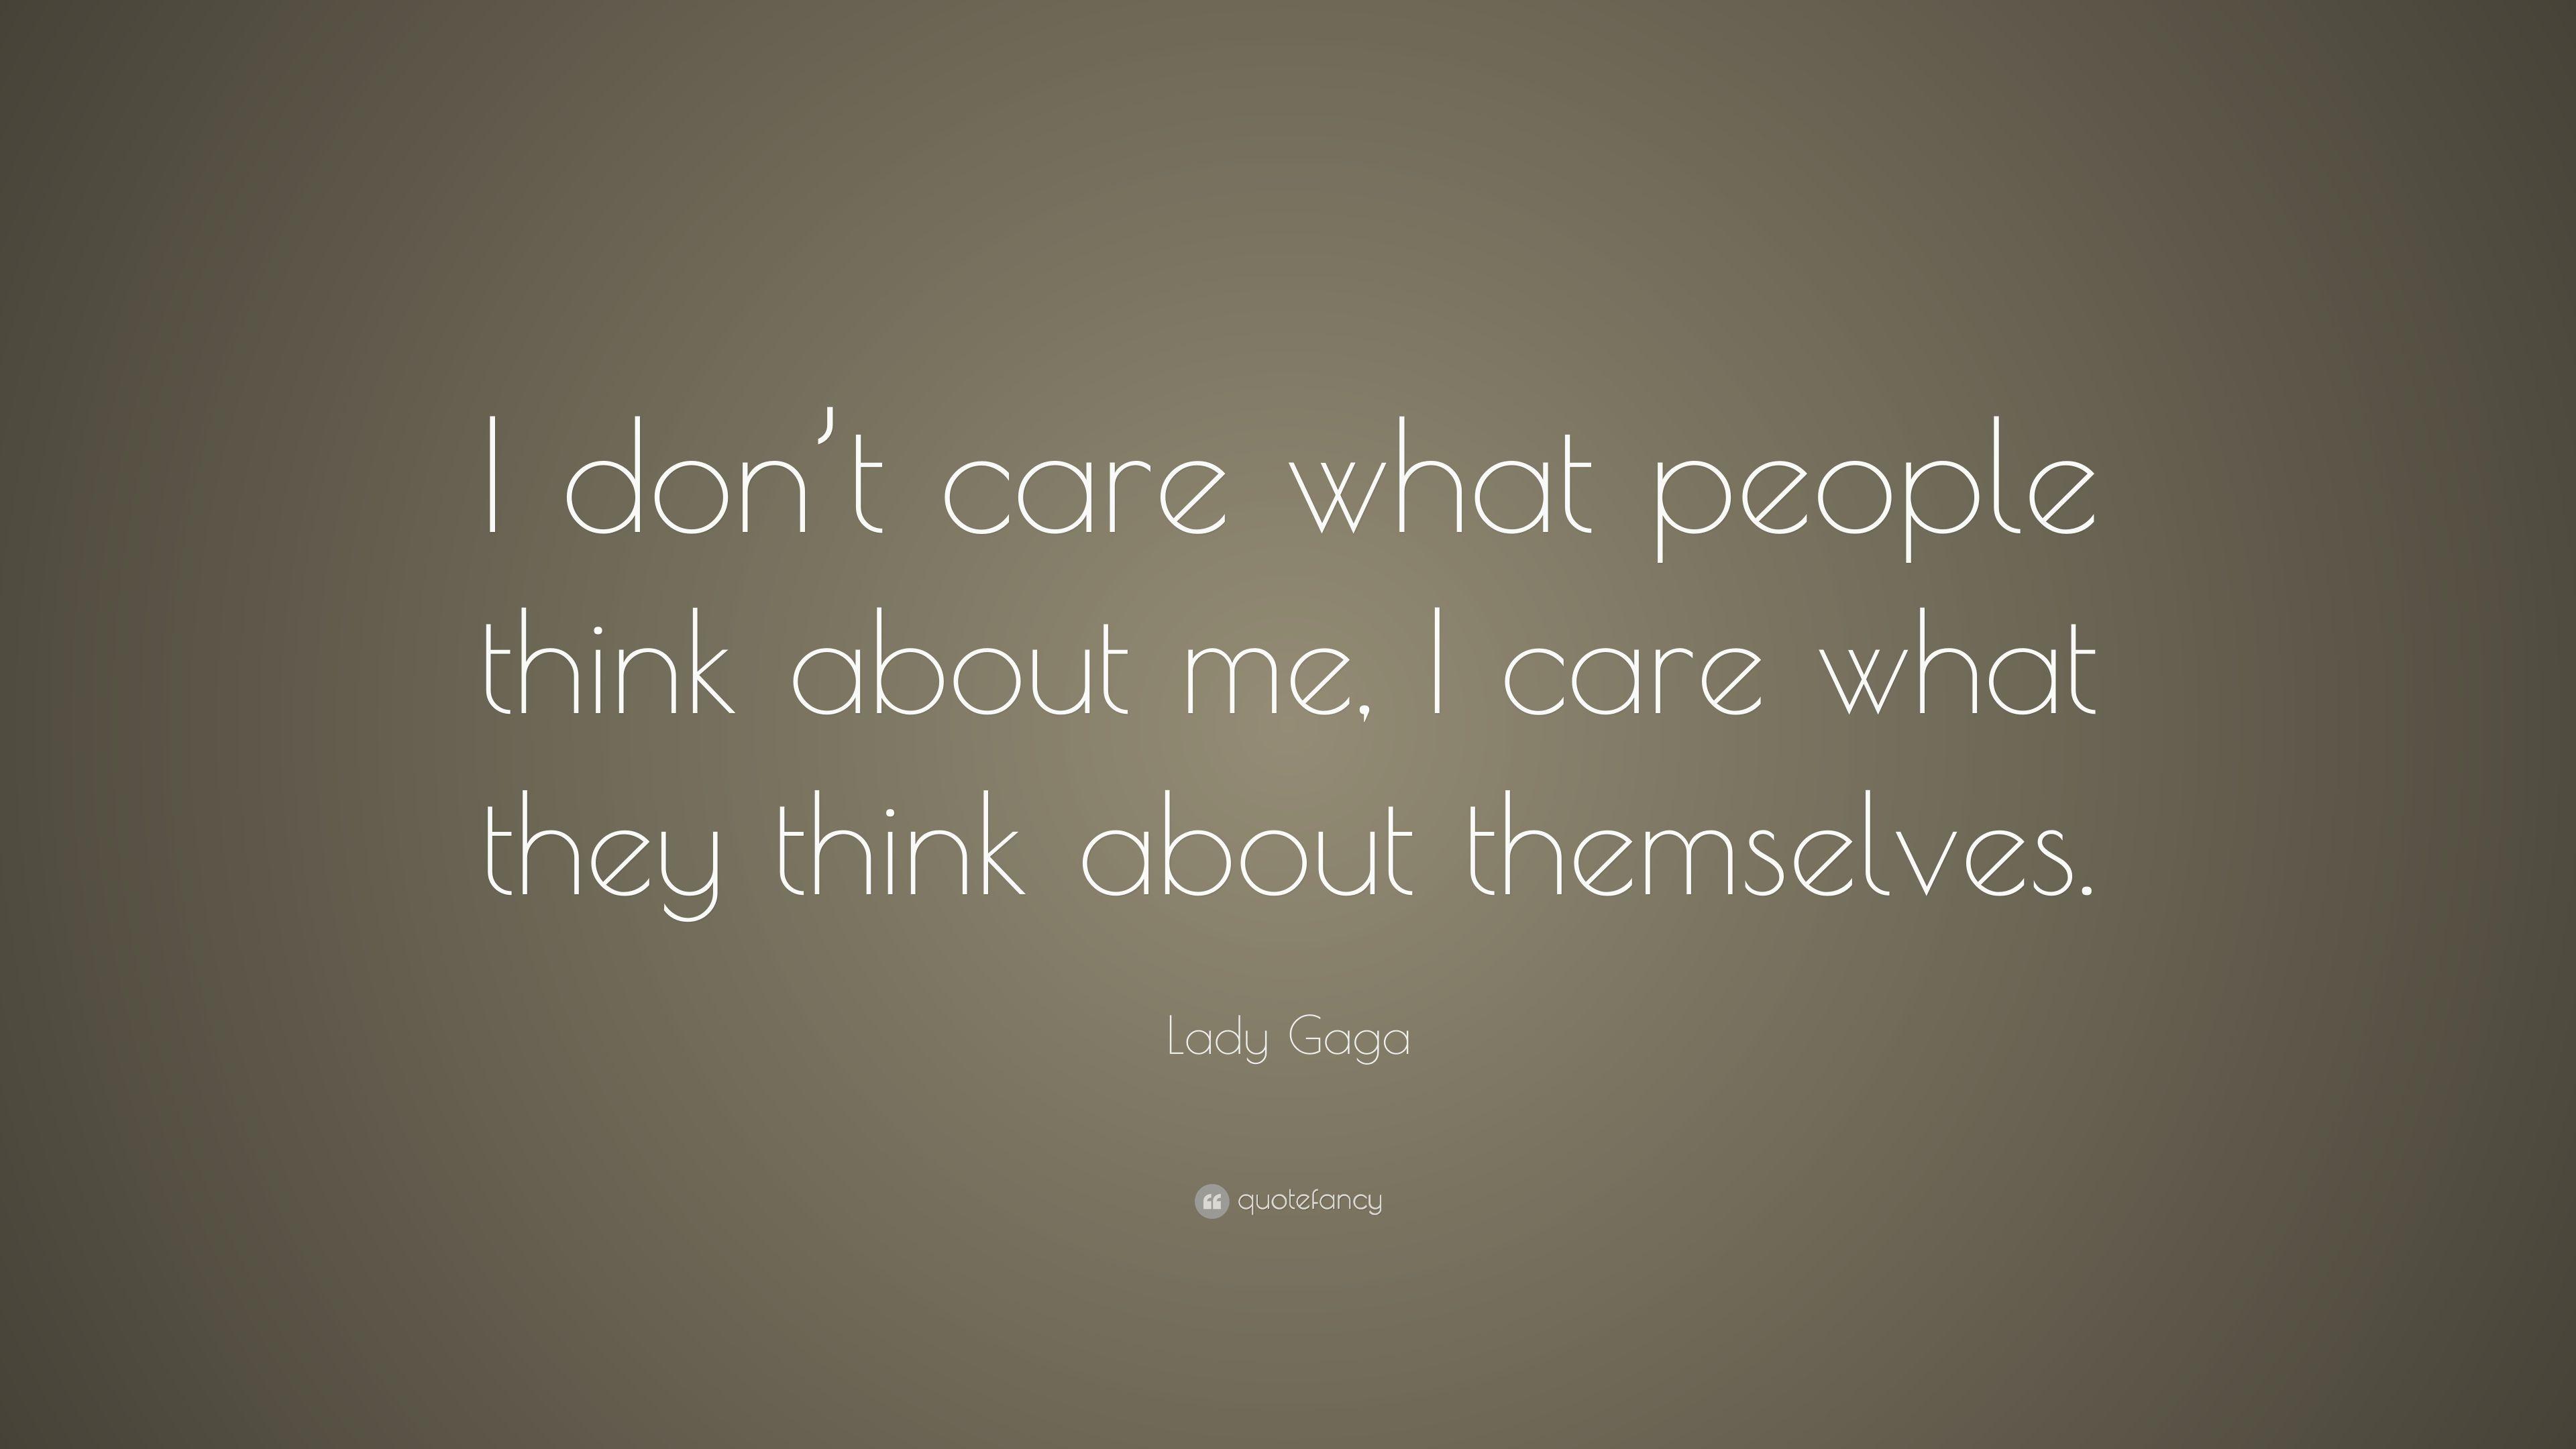 Lady Gaga Quote: "I don't care what people think about me, I care.